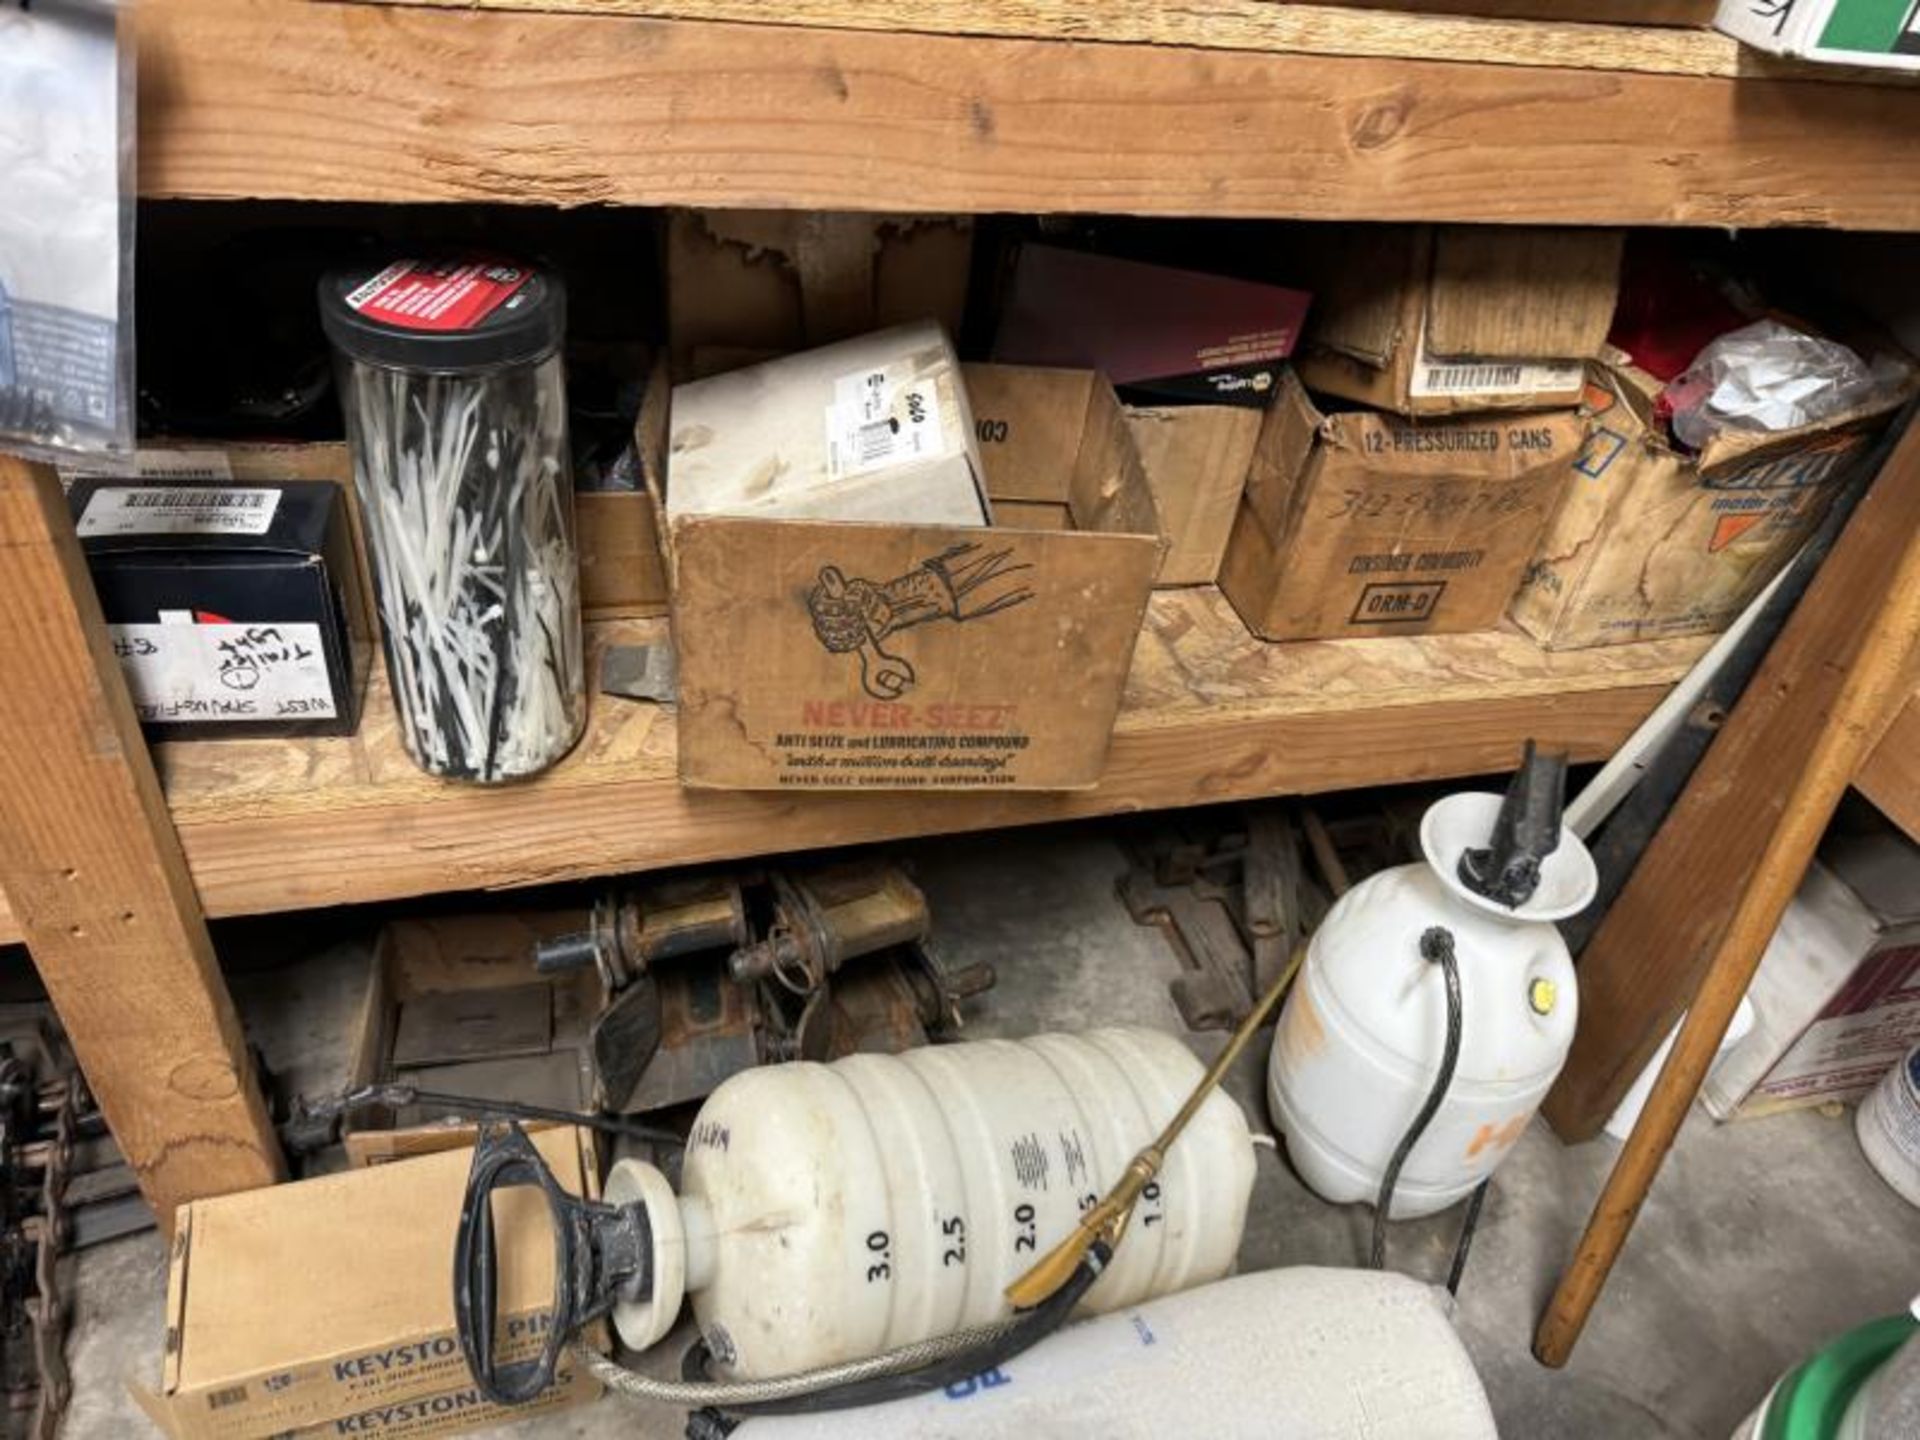 Contents of Shelving Unit (NOT SHELF) Including: Spray Paint, Concrete Adhesive, Vehicles Fuses, Veh - Image 11 of 11